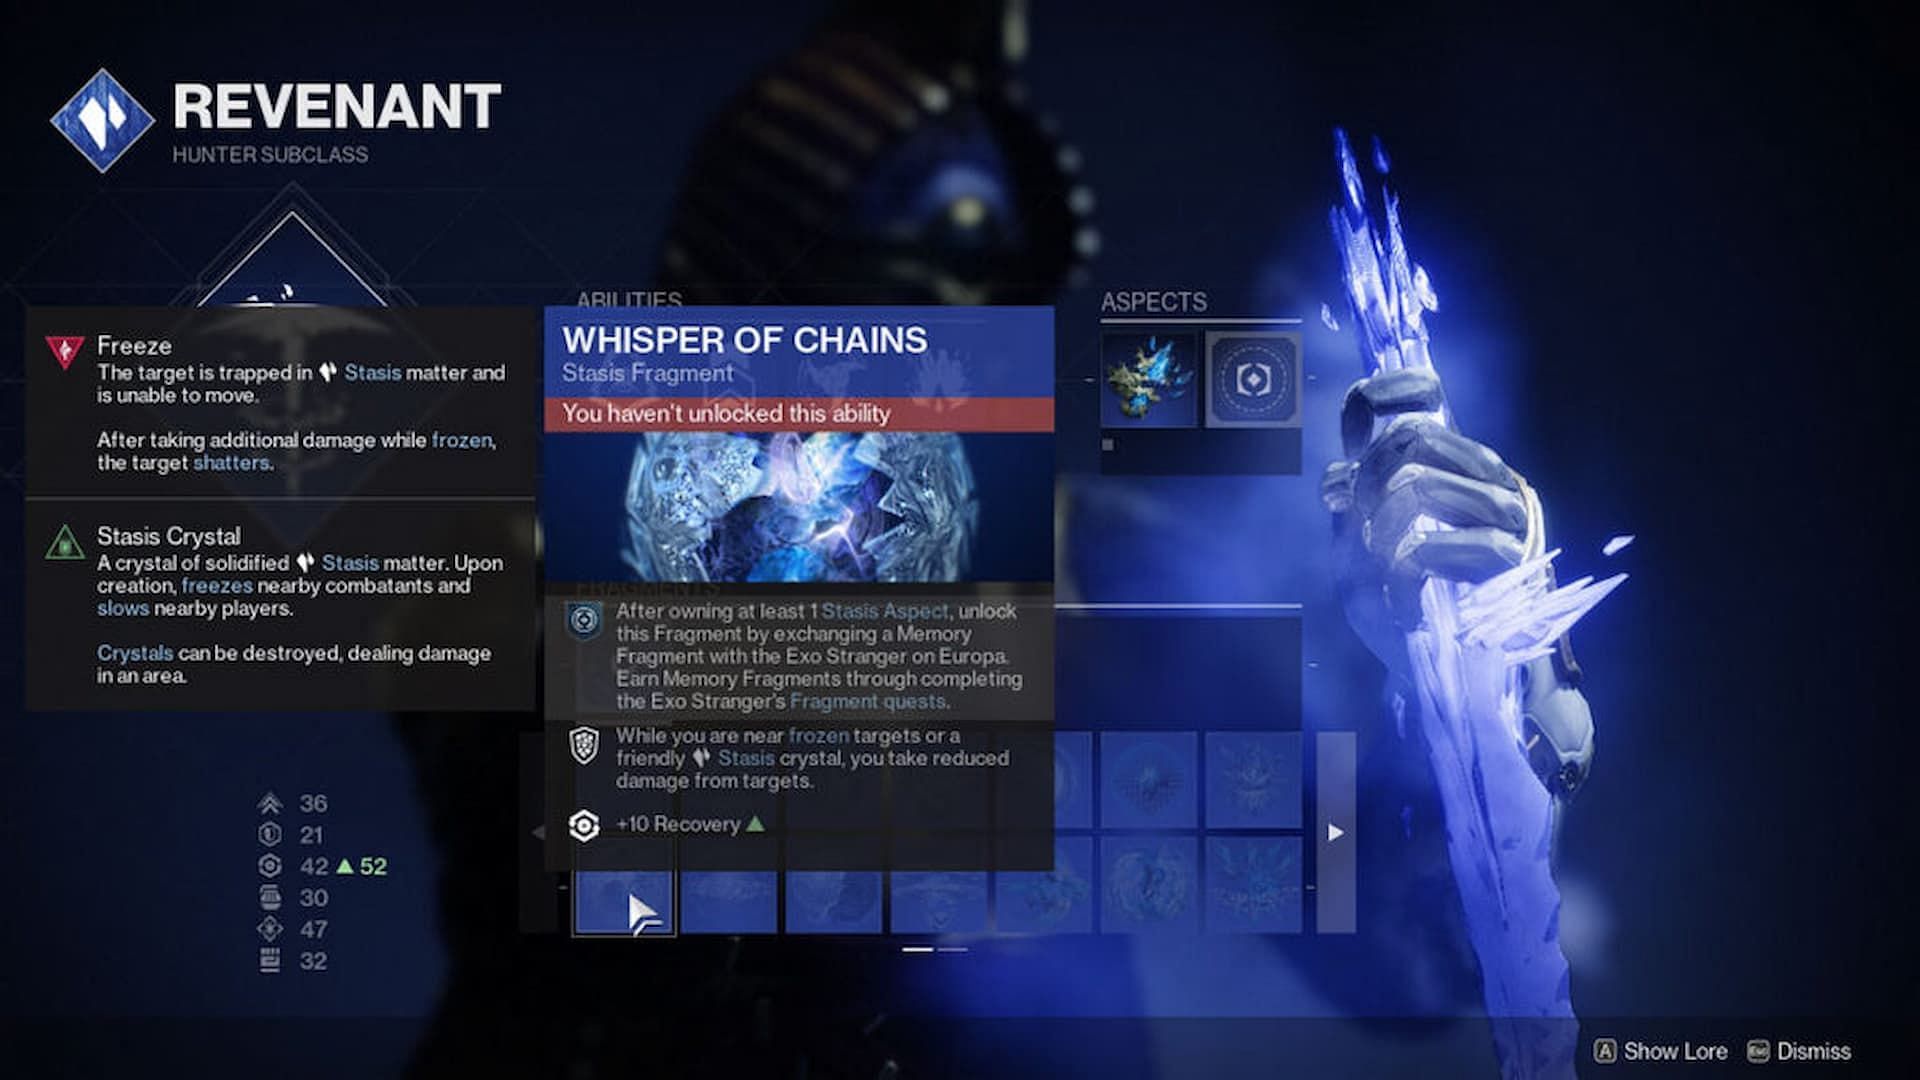 The Whisper of Chains is still a viable fragment even after its nerf (Image via Bungie)